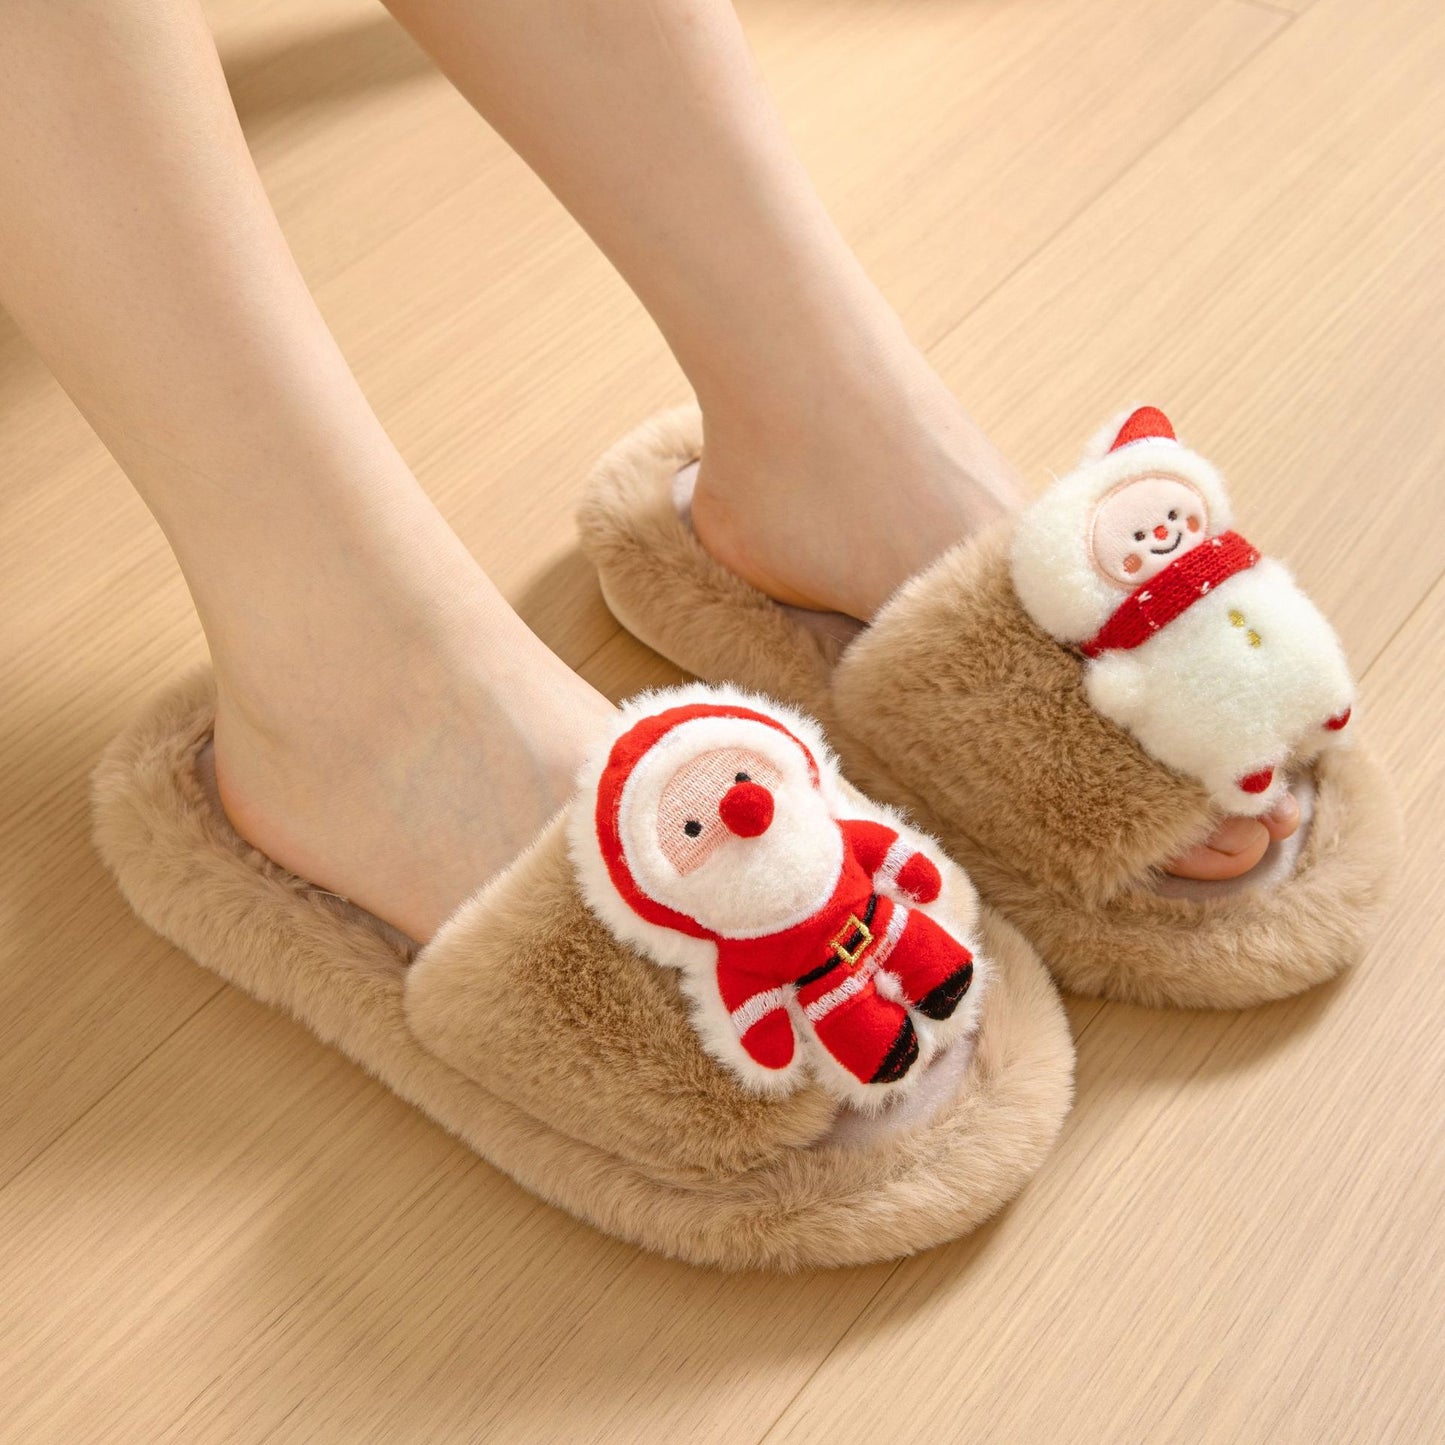 Christmas Shoes Ins Santa Claus Open-toe Cotton Slippers Winter Home Indoor Floor Plush Warm Furry Slippers Women